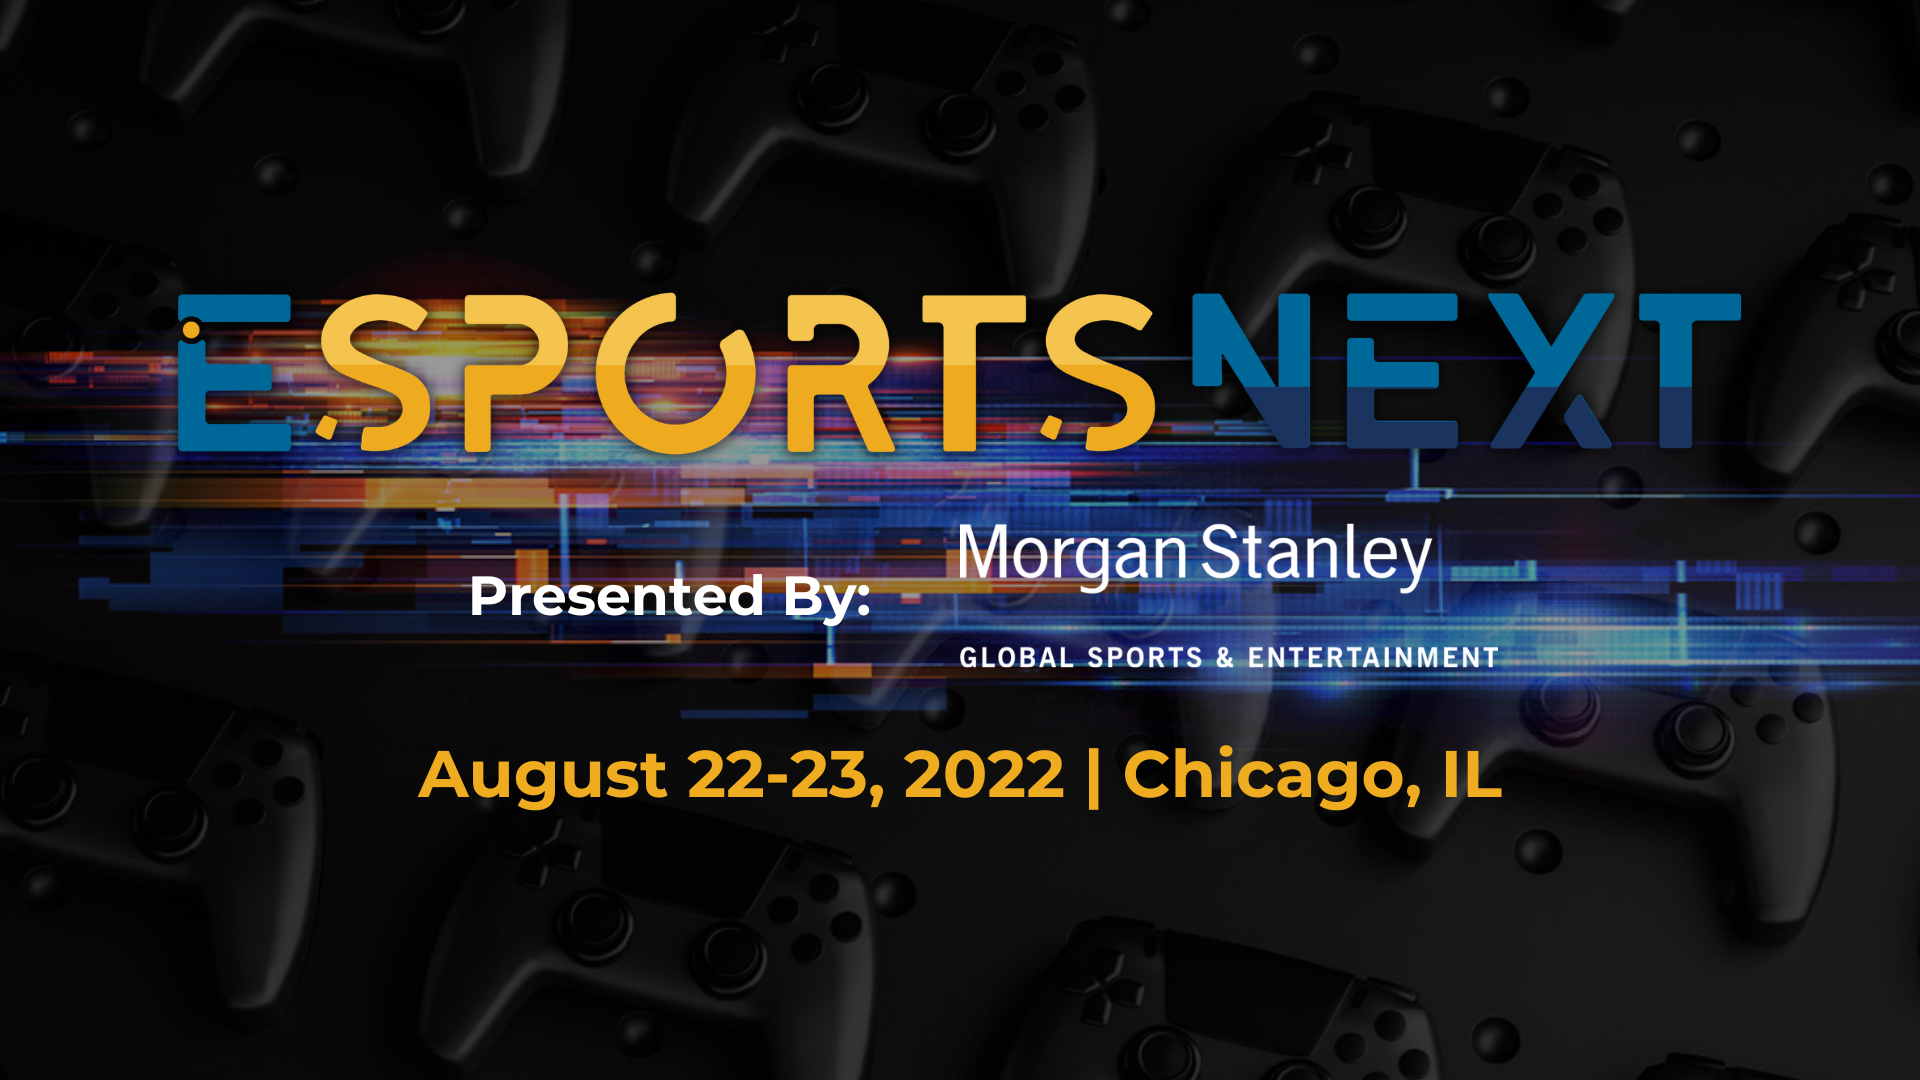 Esports Trade Association to Hold Fourth Annual EsportsNext Conference; August 21-23 in Chicago, Illinois